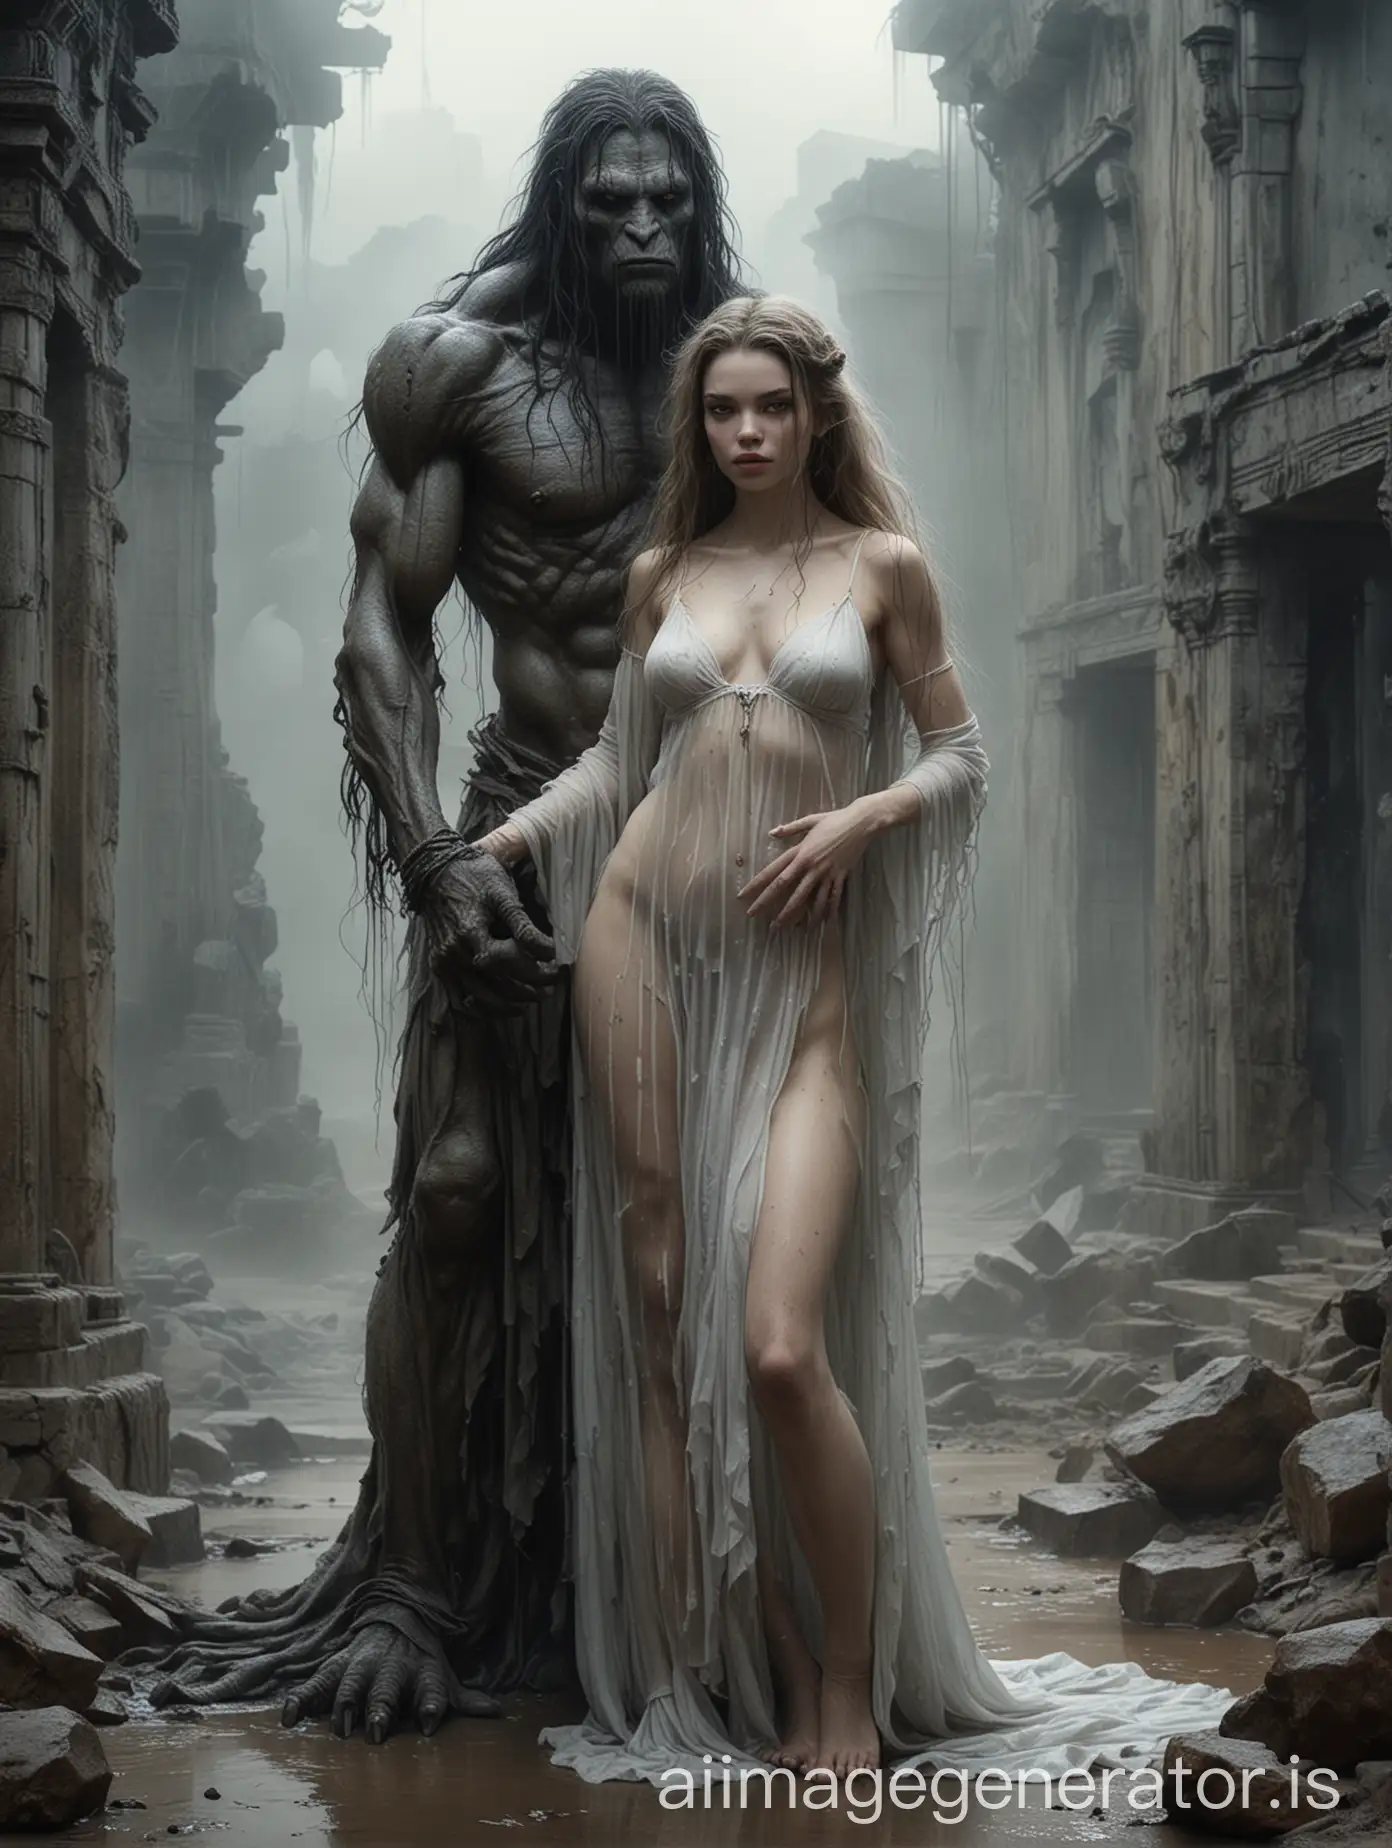 Dark-Fantasy-Art-Troll-Creature-and-Woman-Embrace-in-Ancient-Ruins